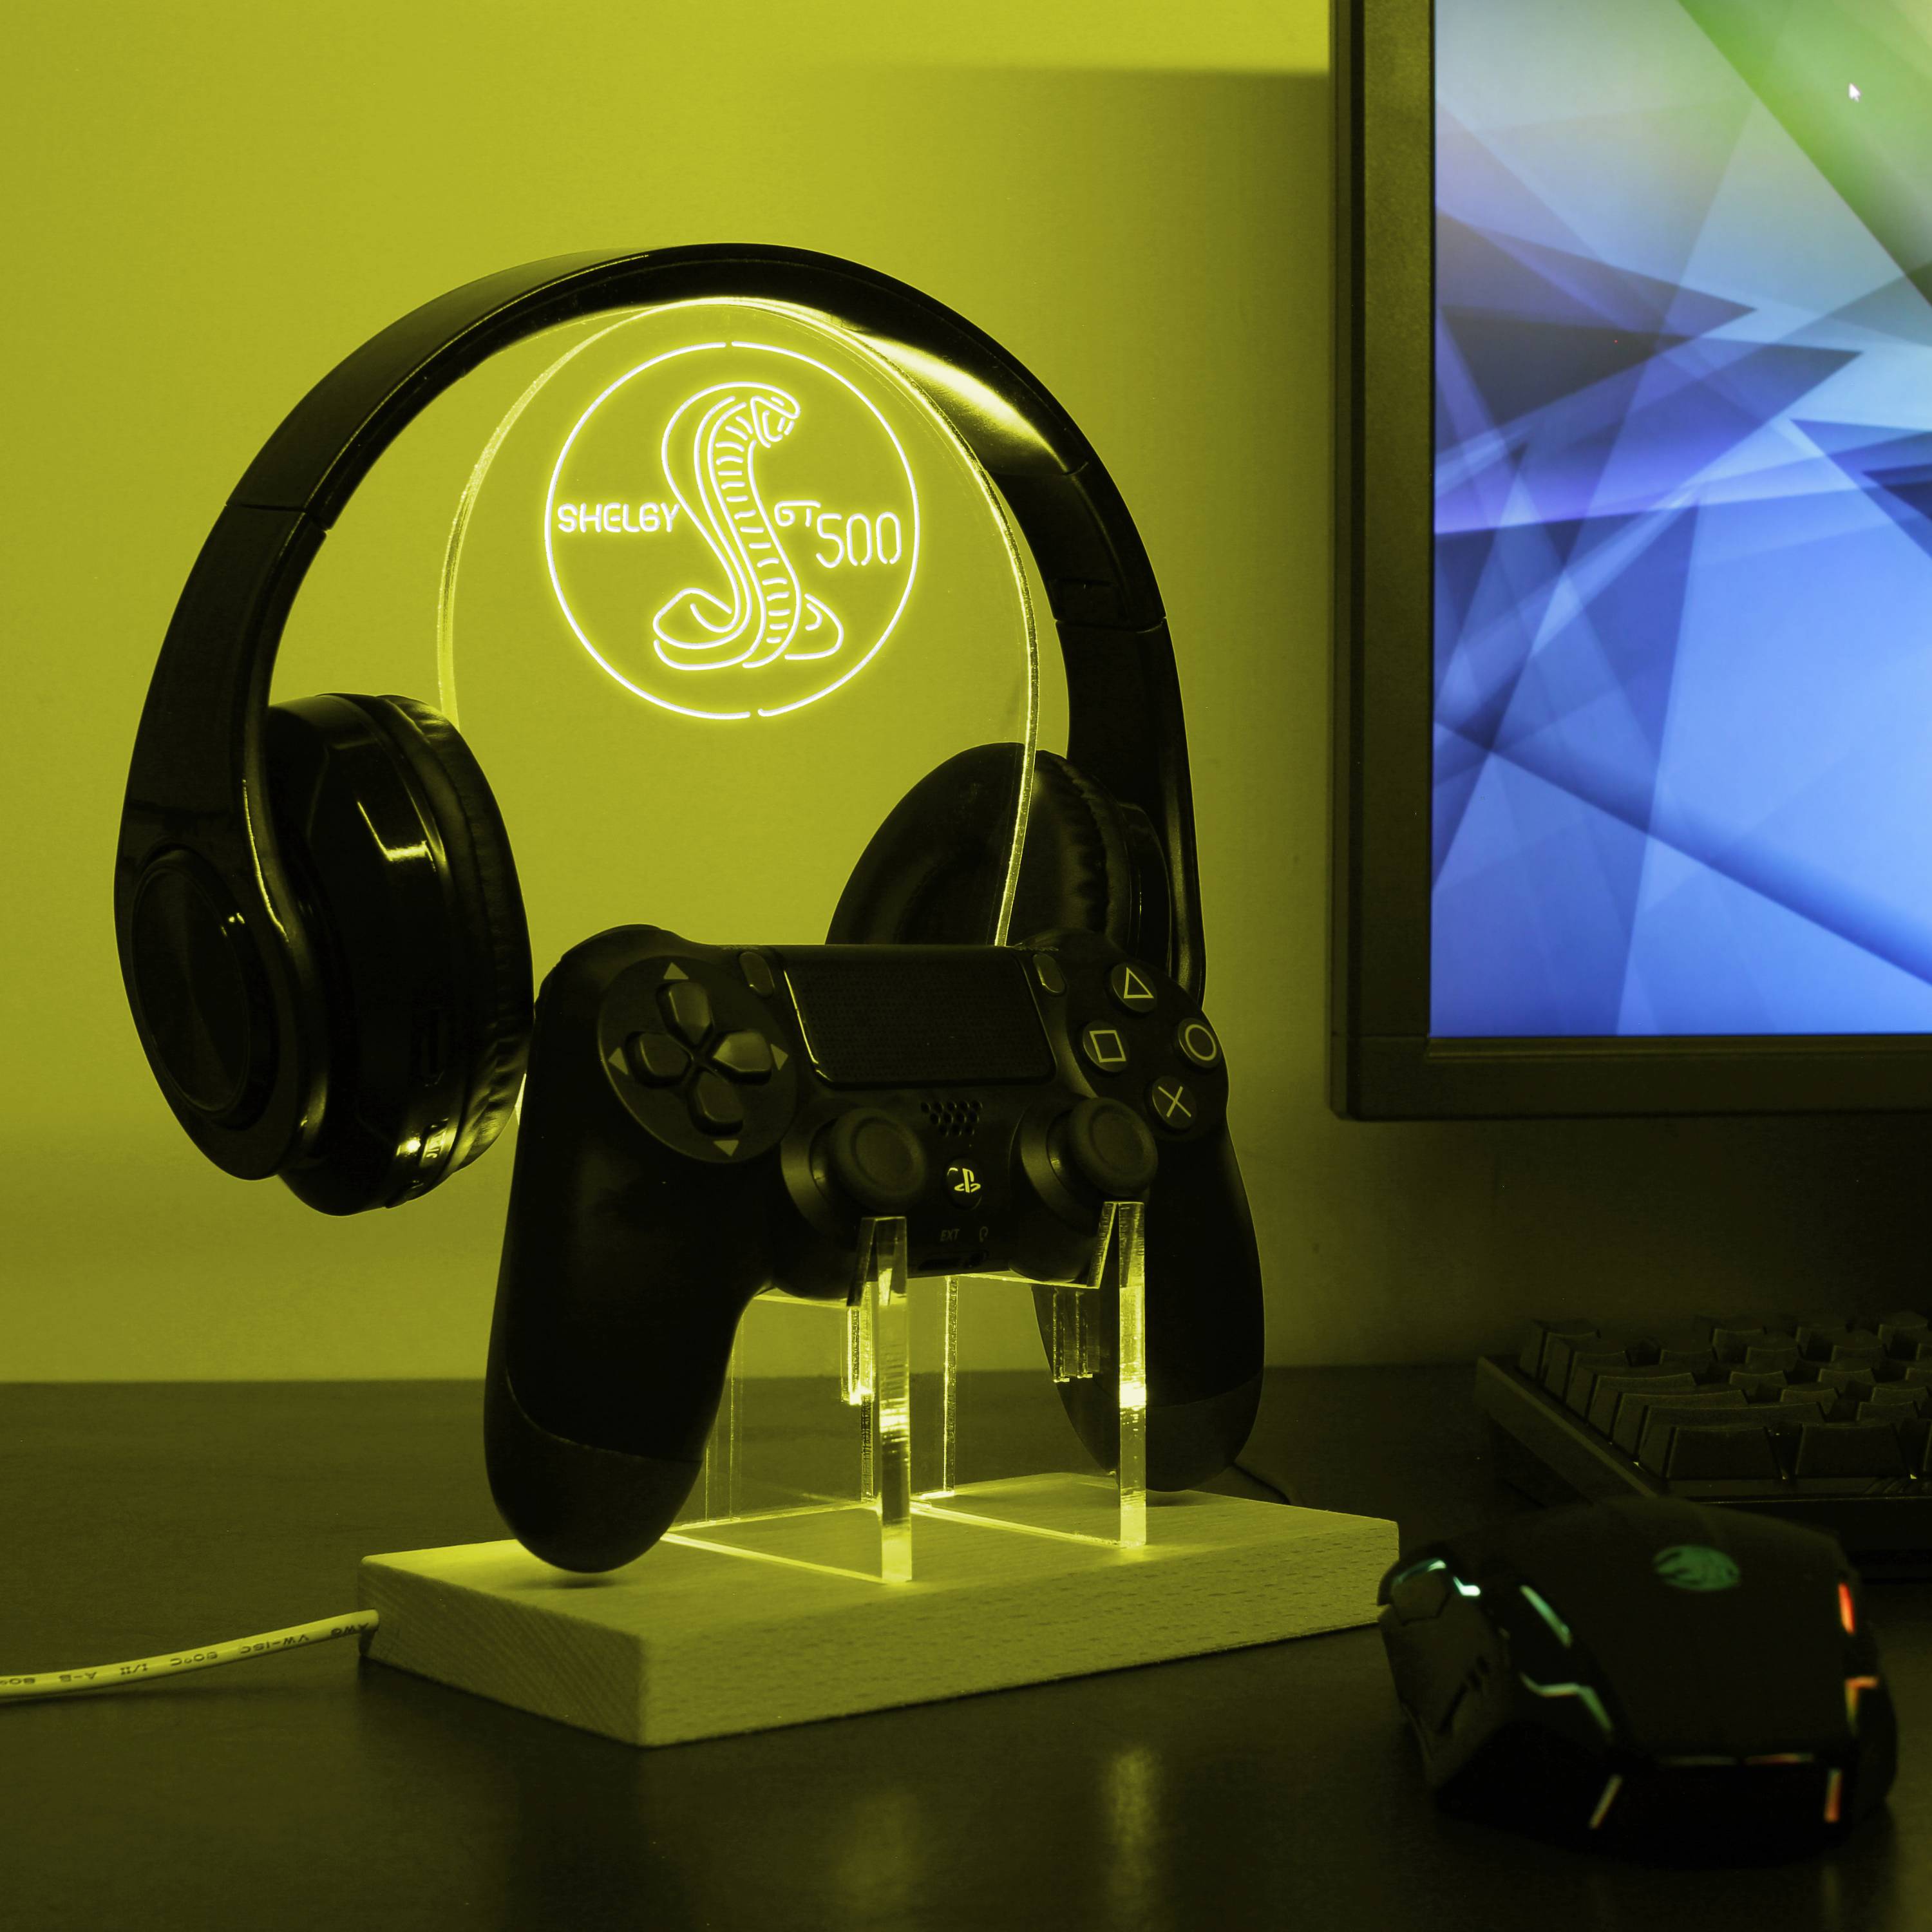 Shelby GT500 LED Gaming Headset Controller Stand